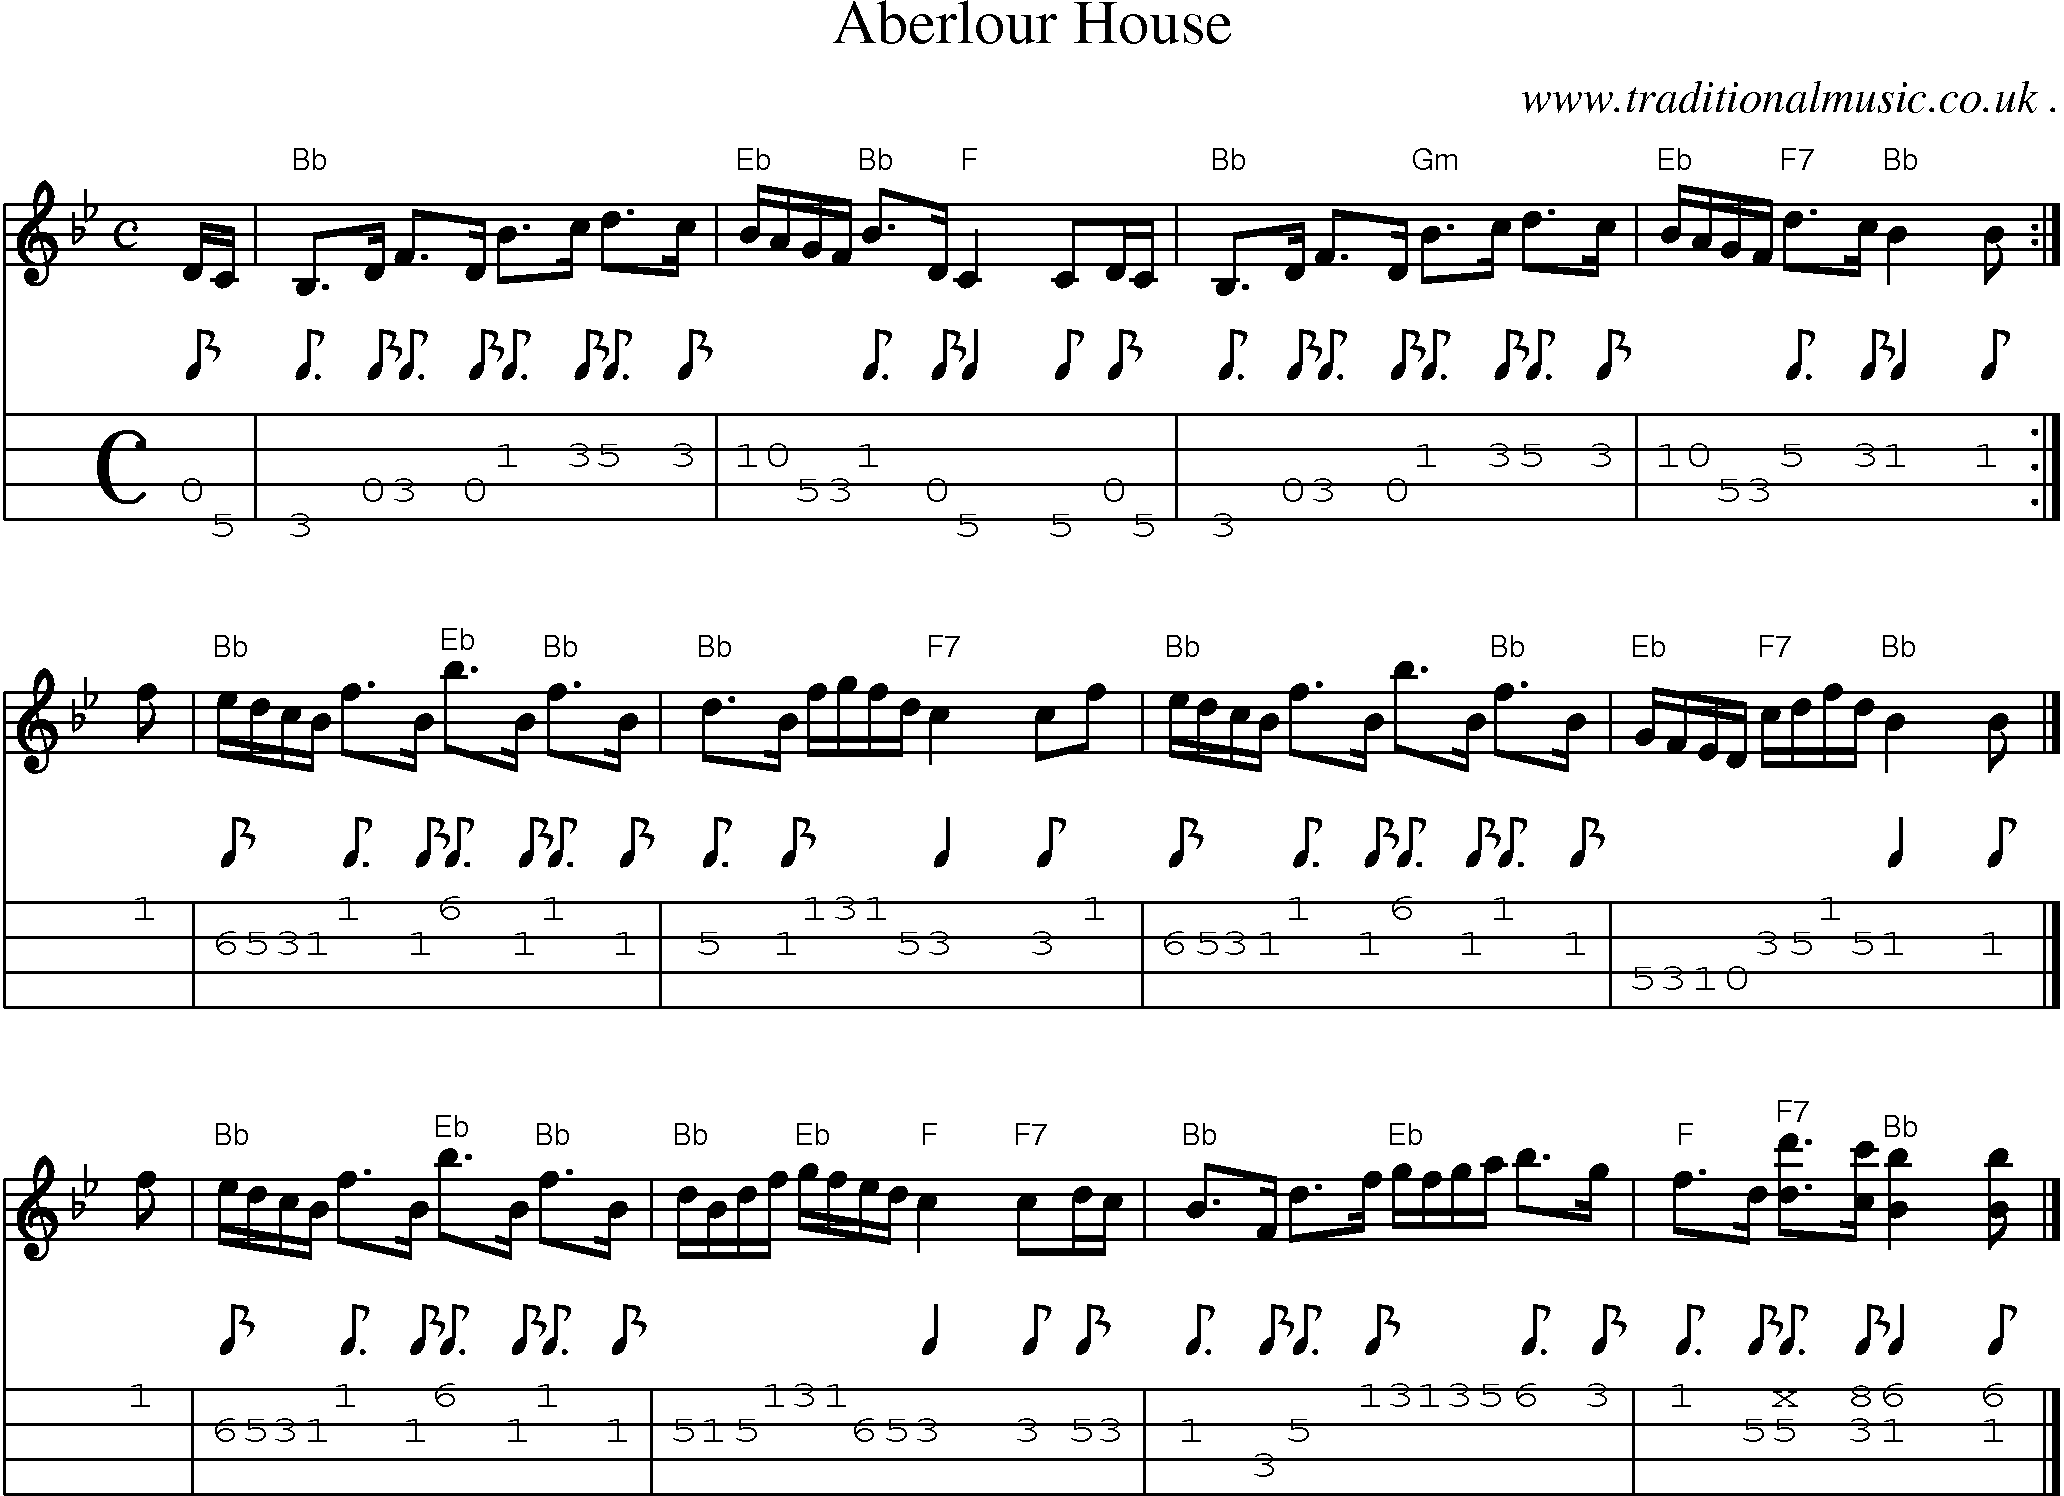 Sheet-music  score, Chords and Mandolin Tabs for Aberlour House